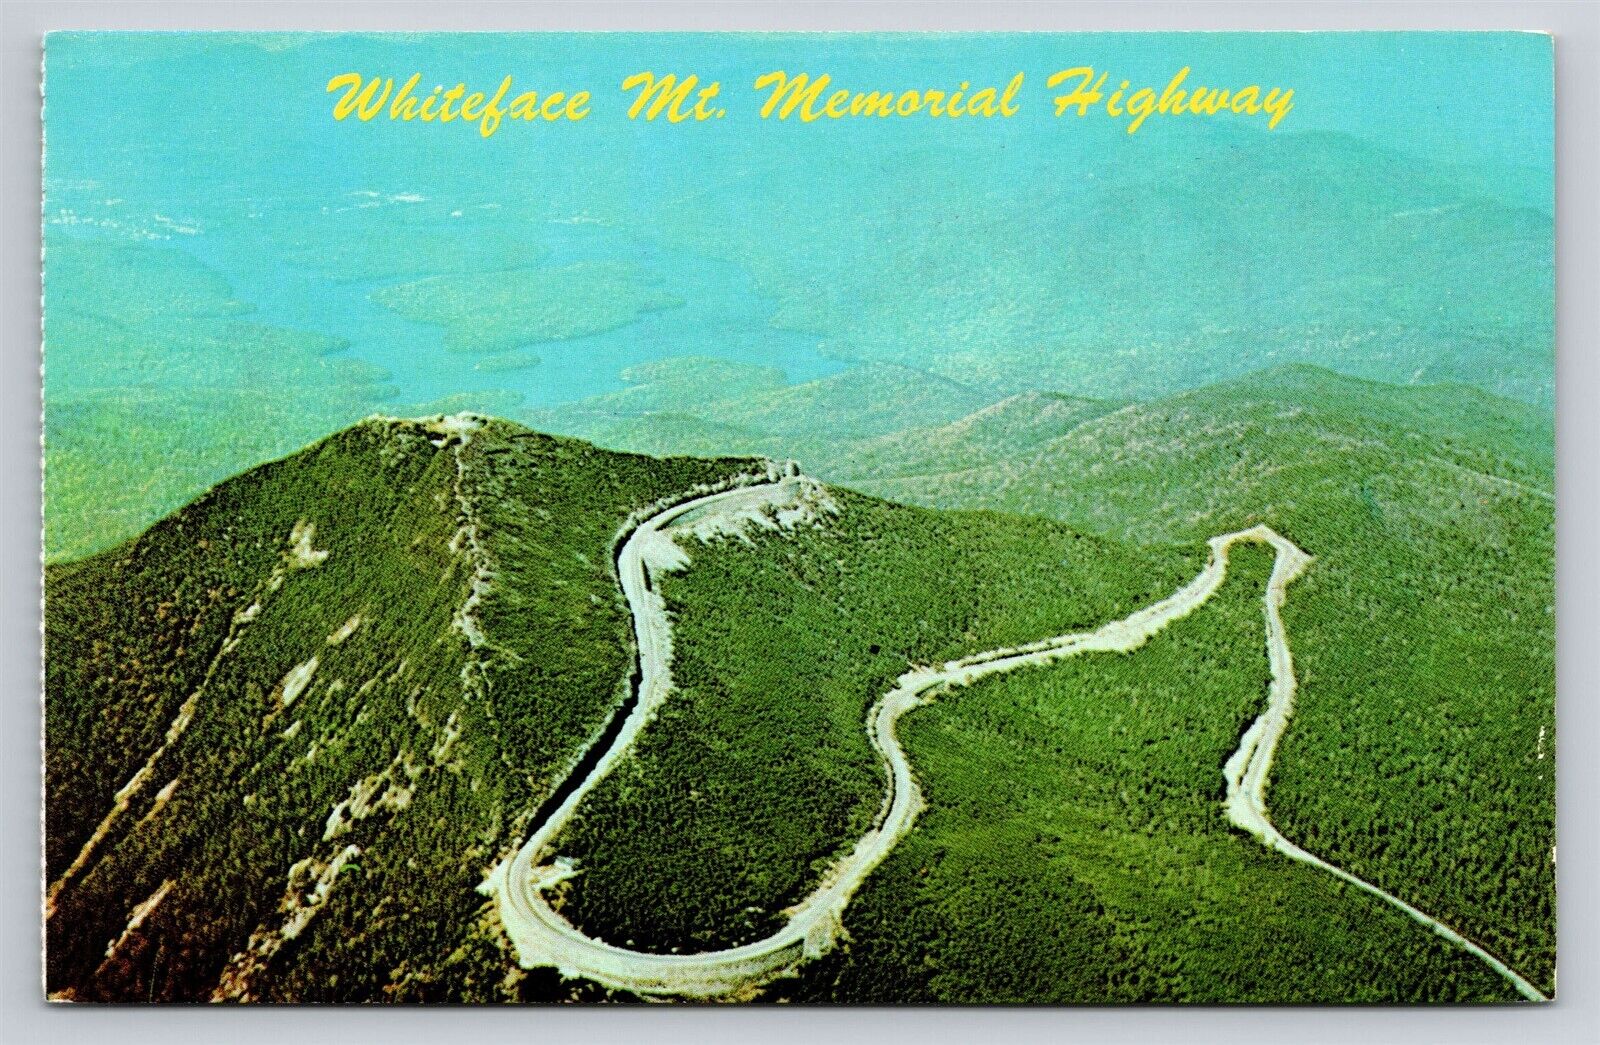 Whiteface Mountain Memorial Highway Aerial View New York Vintage Postcard NY 